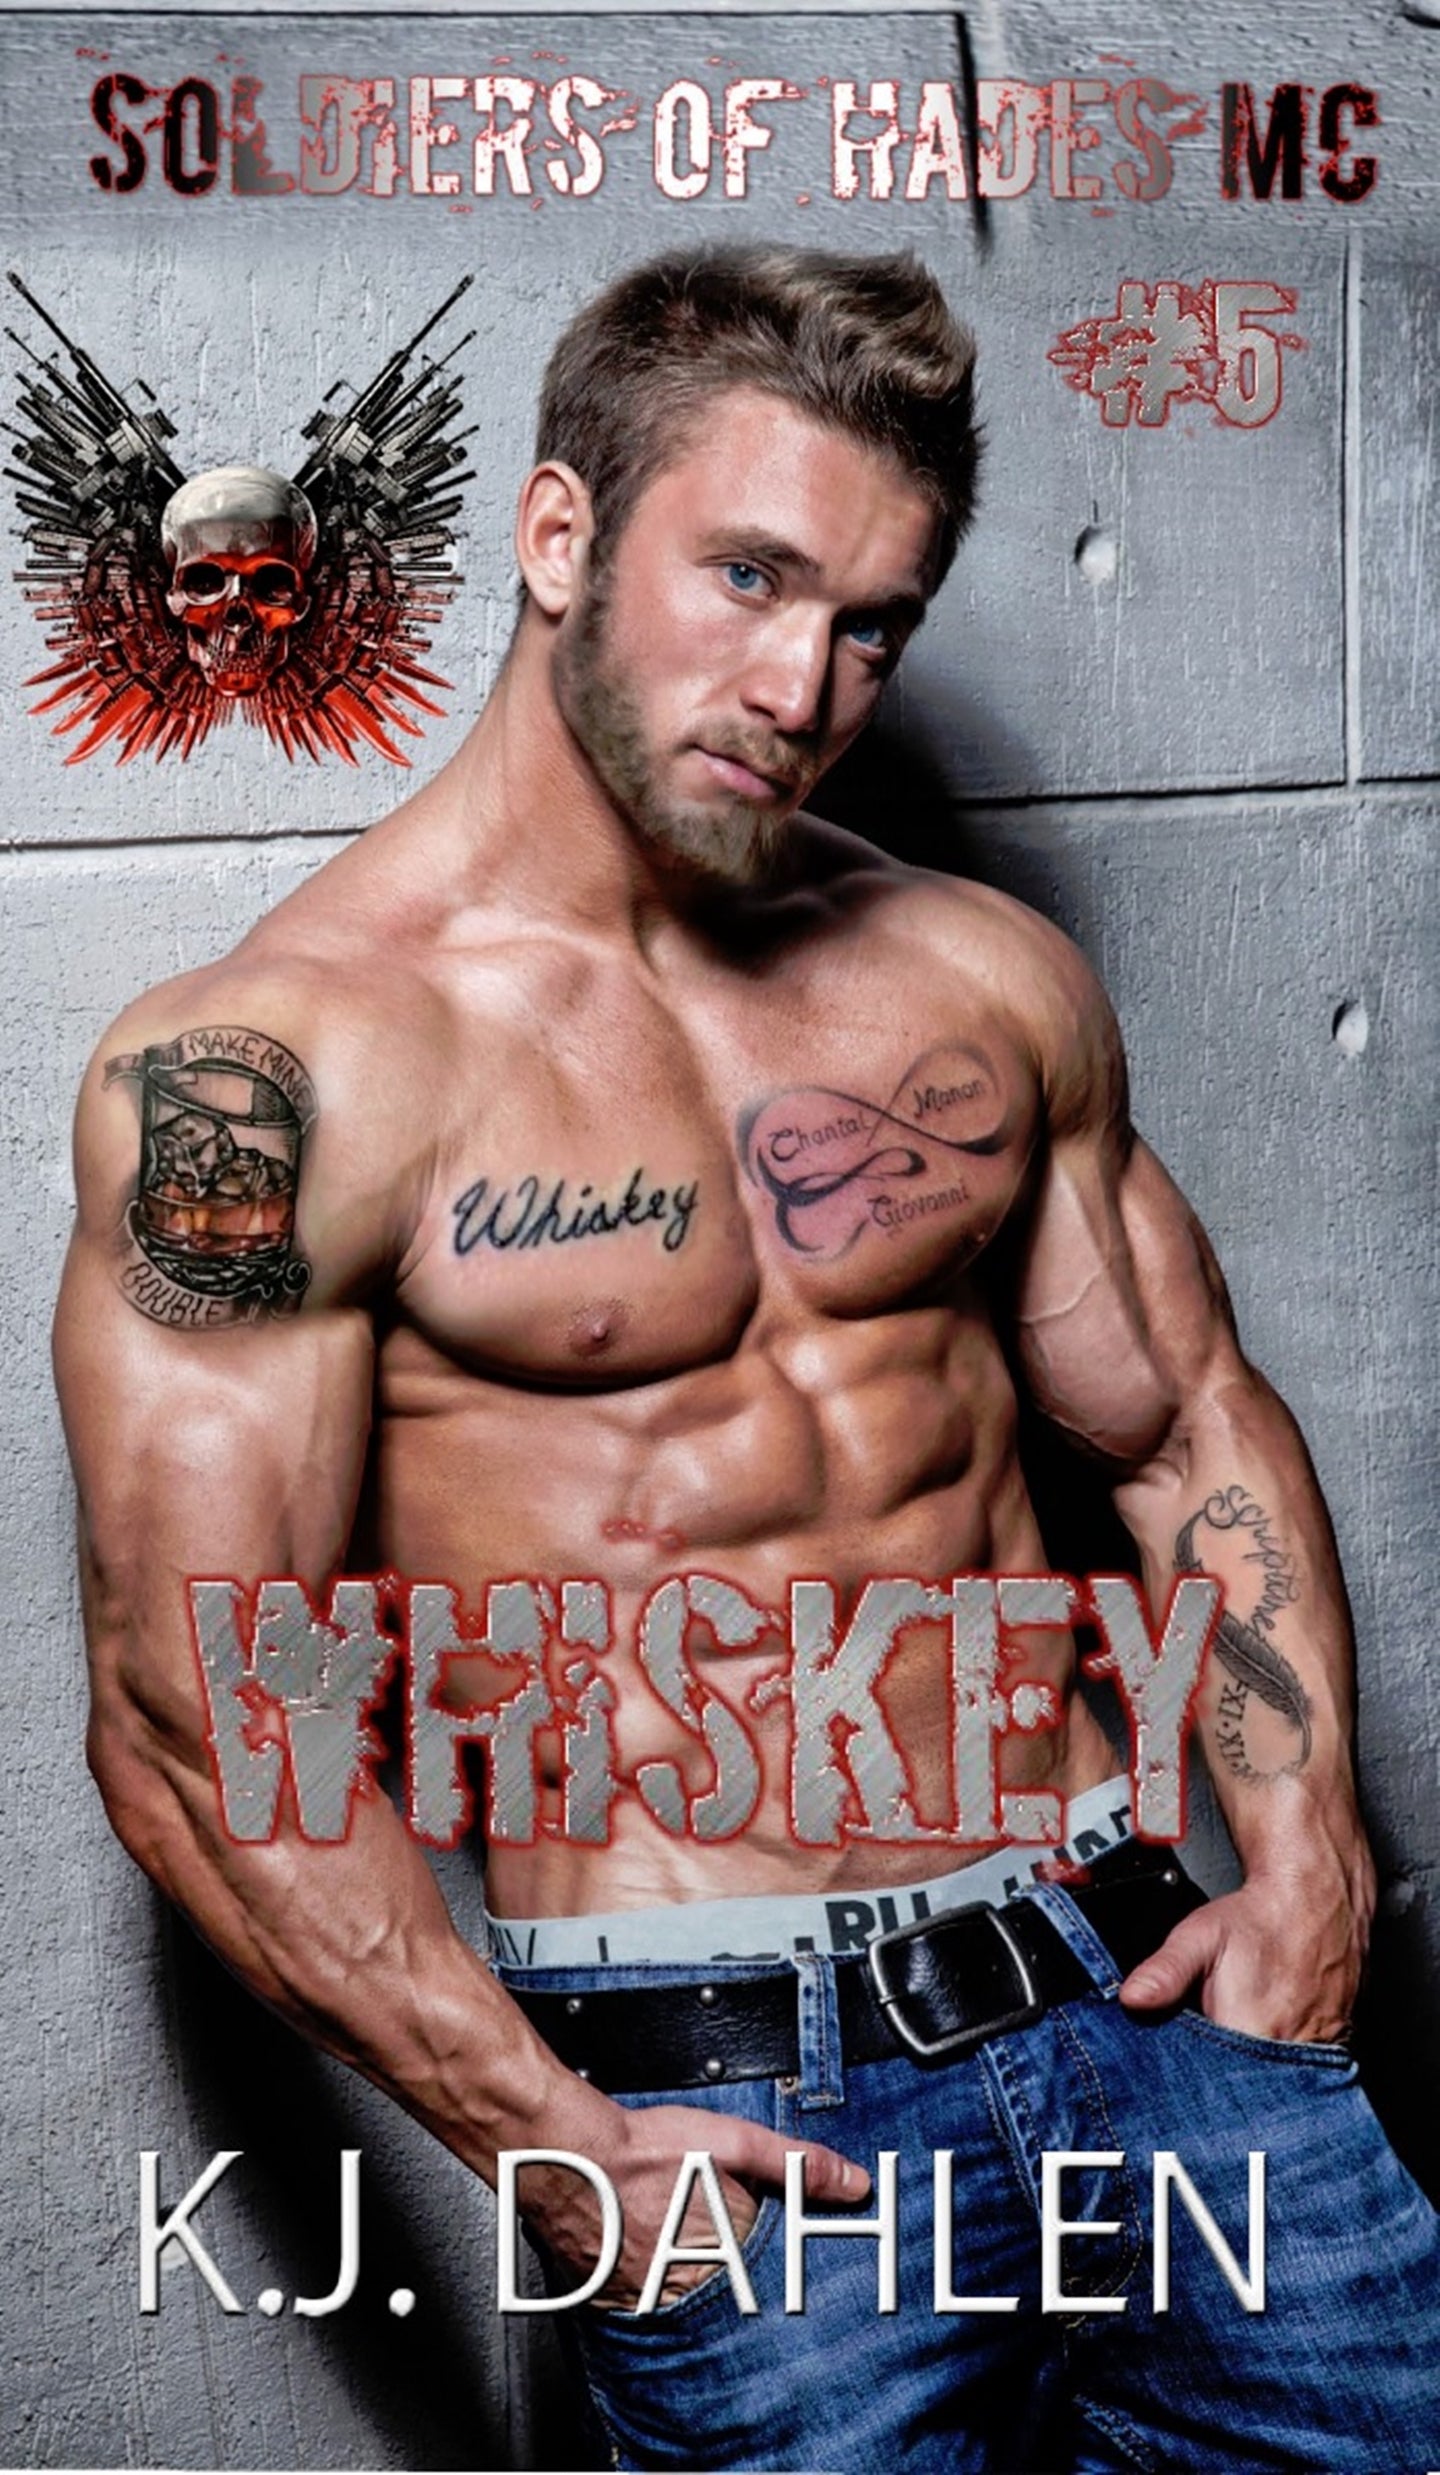 Whiskey-Soldiers-Of-Hades-MC-#5-Single